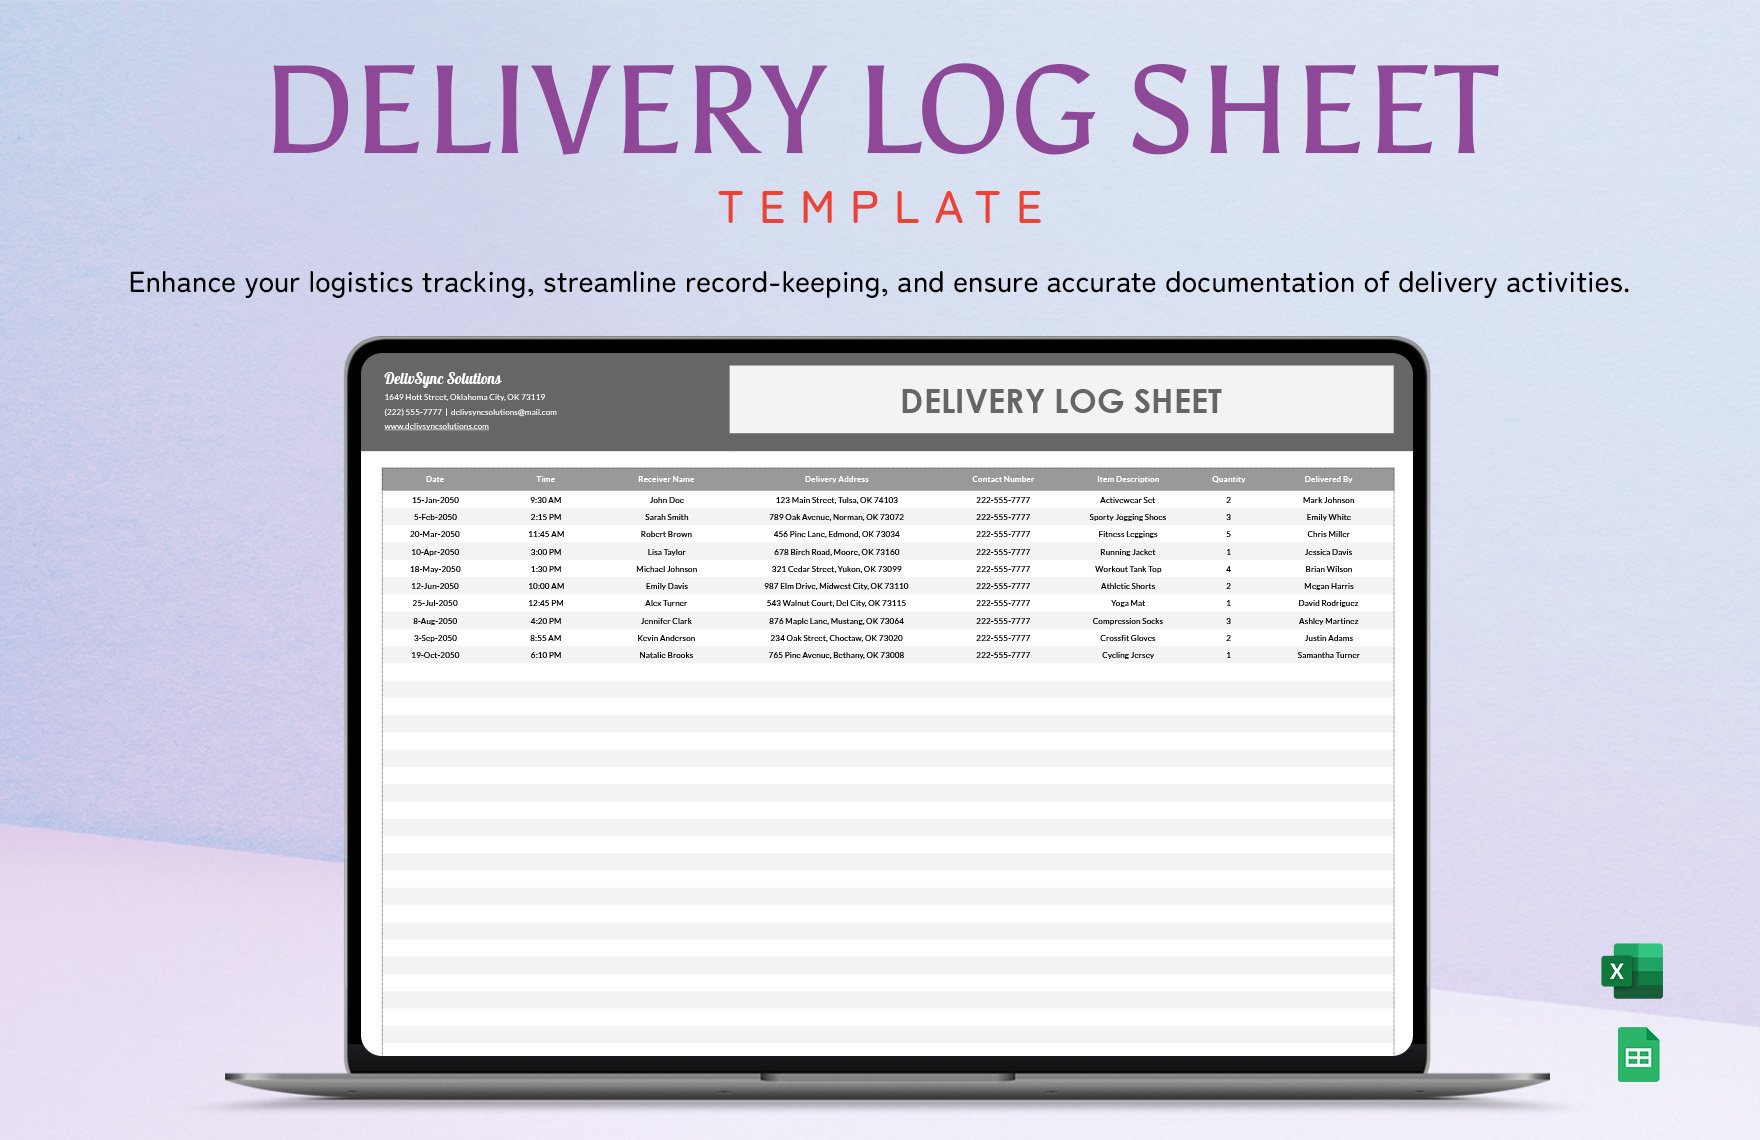 Delivery Log Sheet Template in Excel, Google Sheets